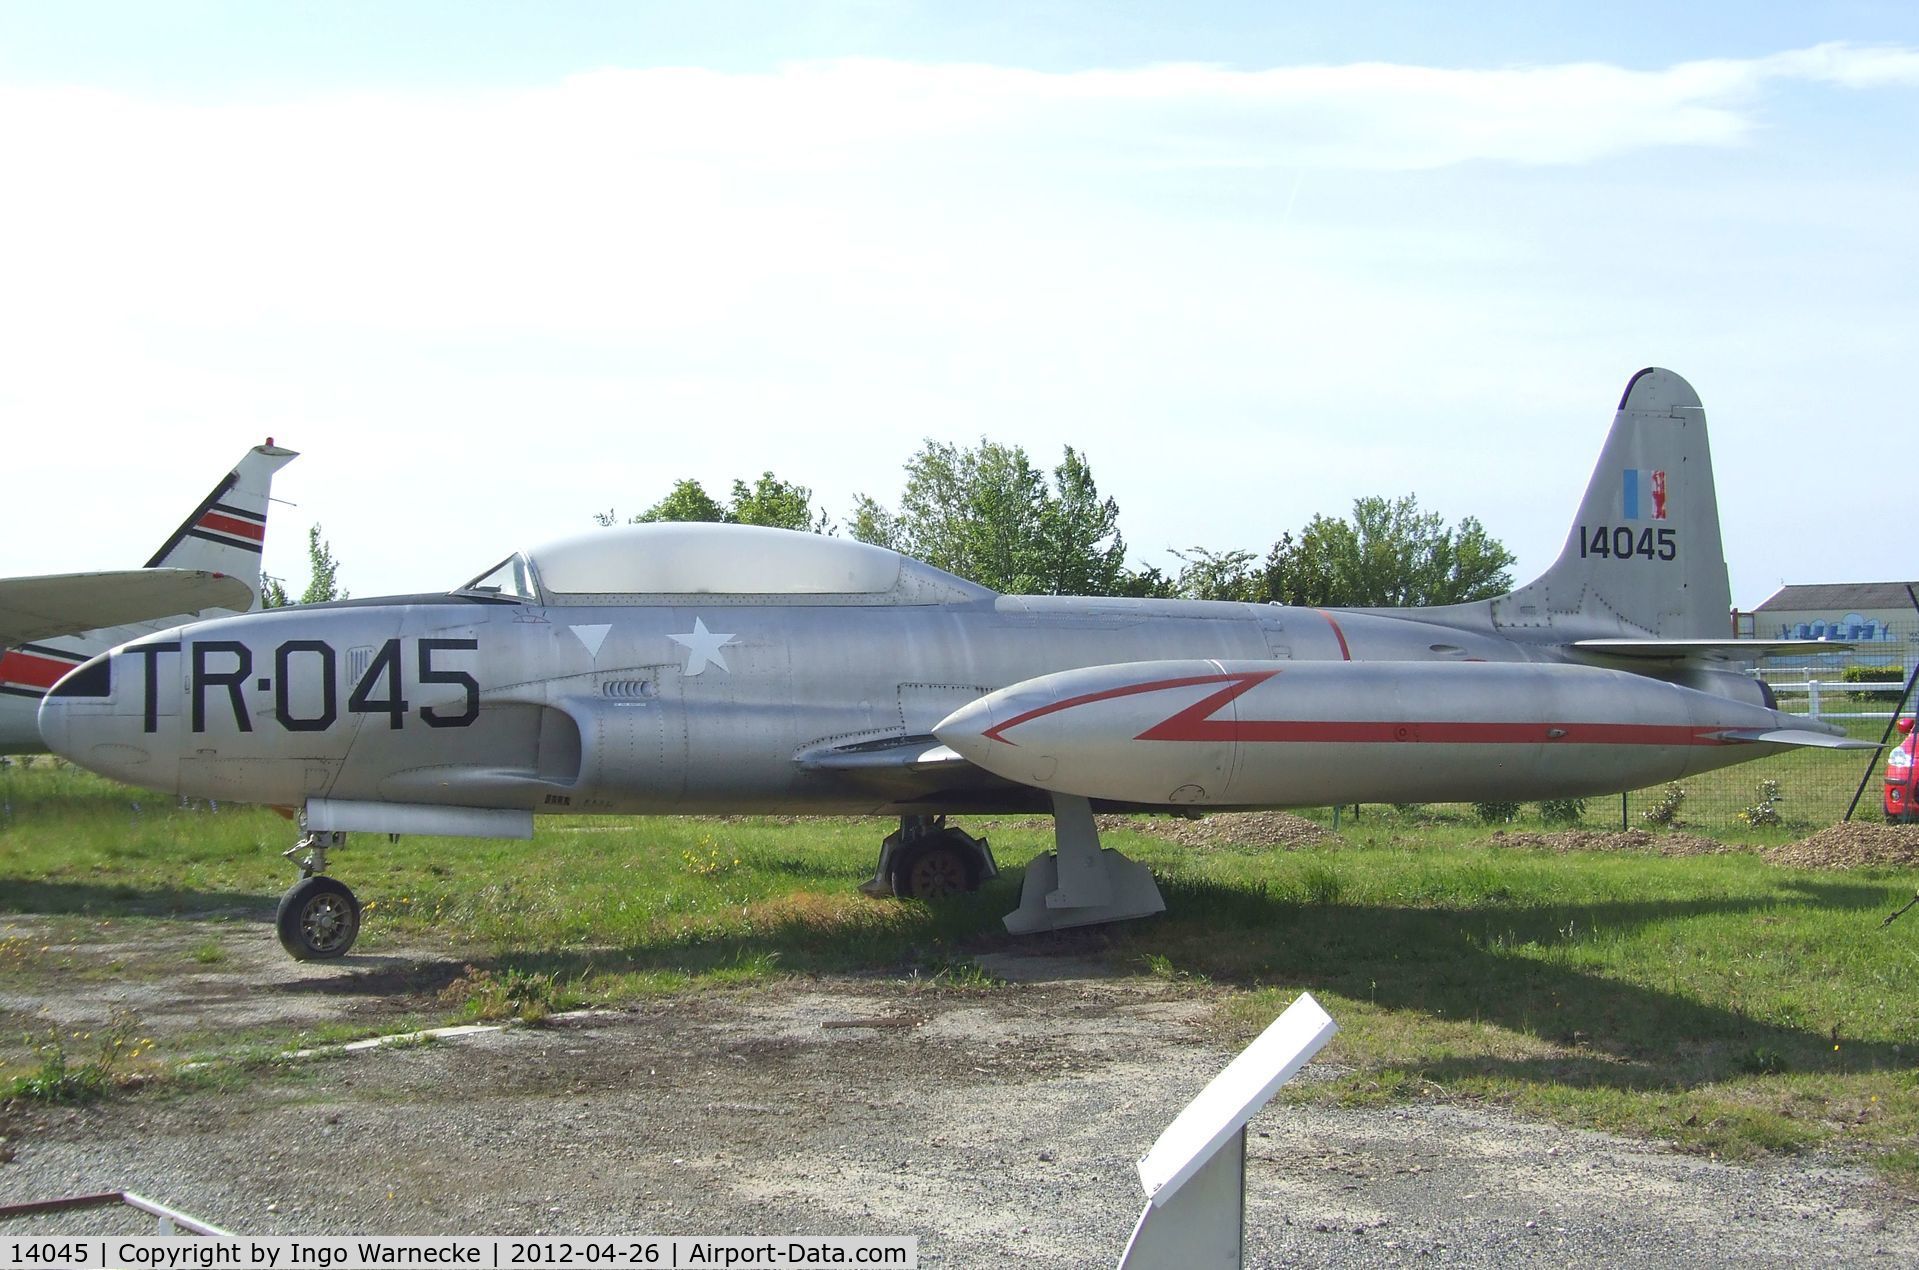 14045, 1951 Lockheed T-33A Shooting Star C/N 580-5339, Lockheed T-33A at the Musée Européen de l'Aviation de Chasse, Montelimar Ancone airfield